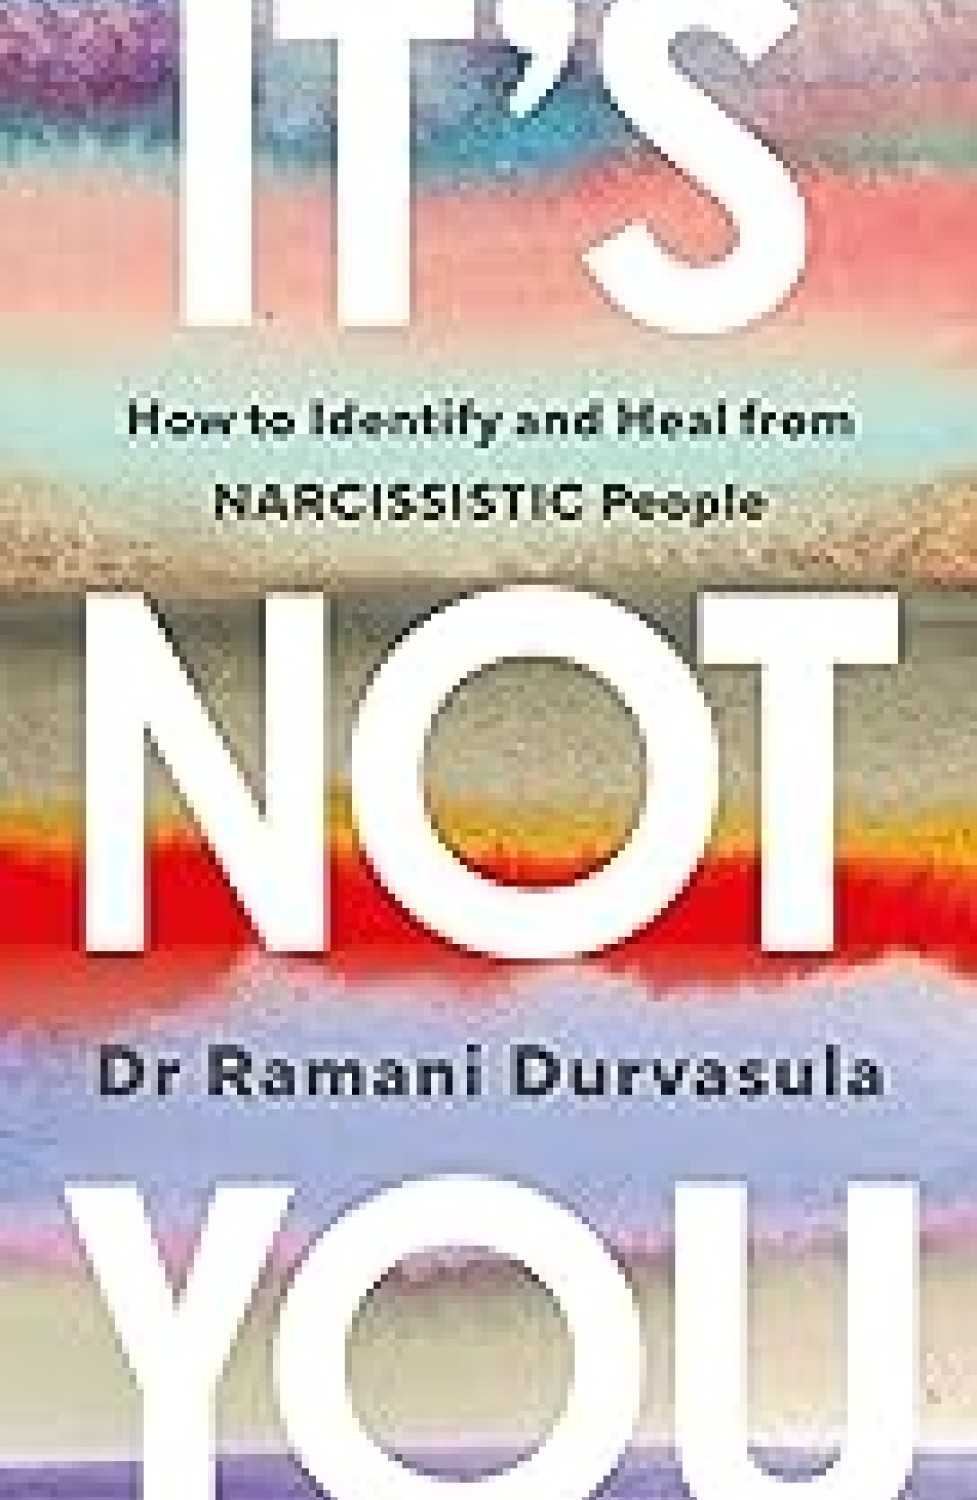 IT'S NOT YOU : HOW TO IDENTIFY AND HEAL FROM NARCISSISTIC PEOPLE